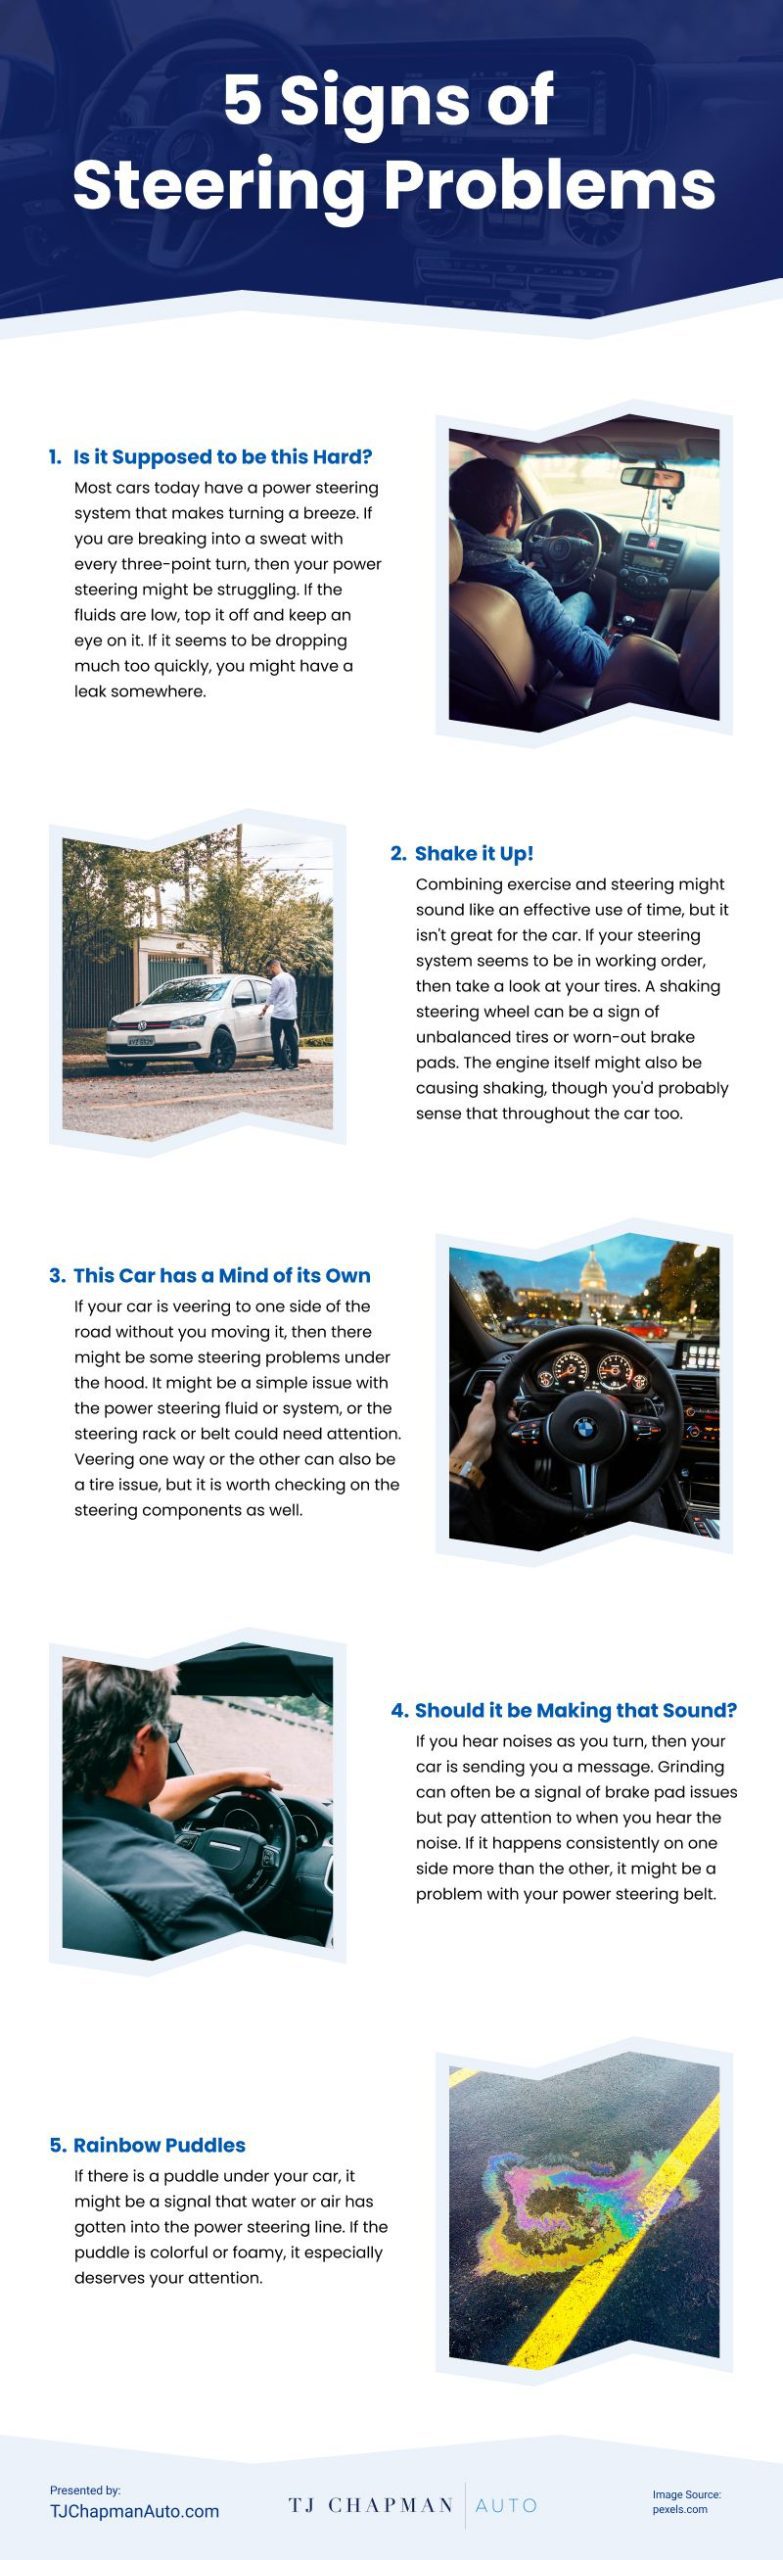 5 Signs of Steering Problems Infographic